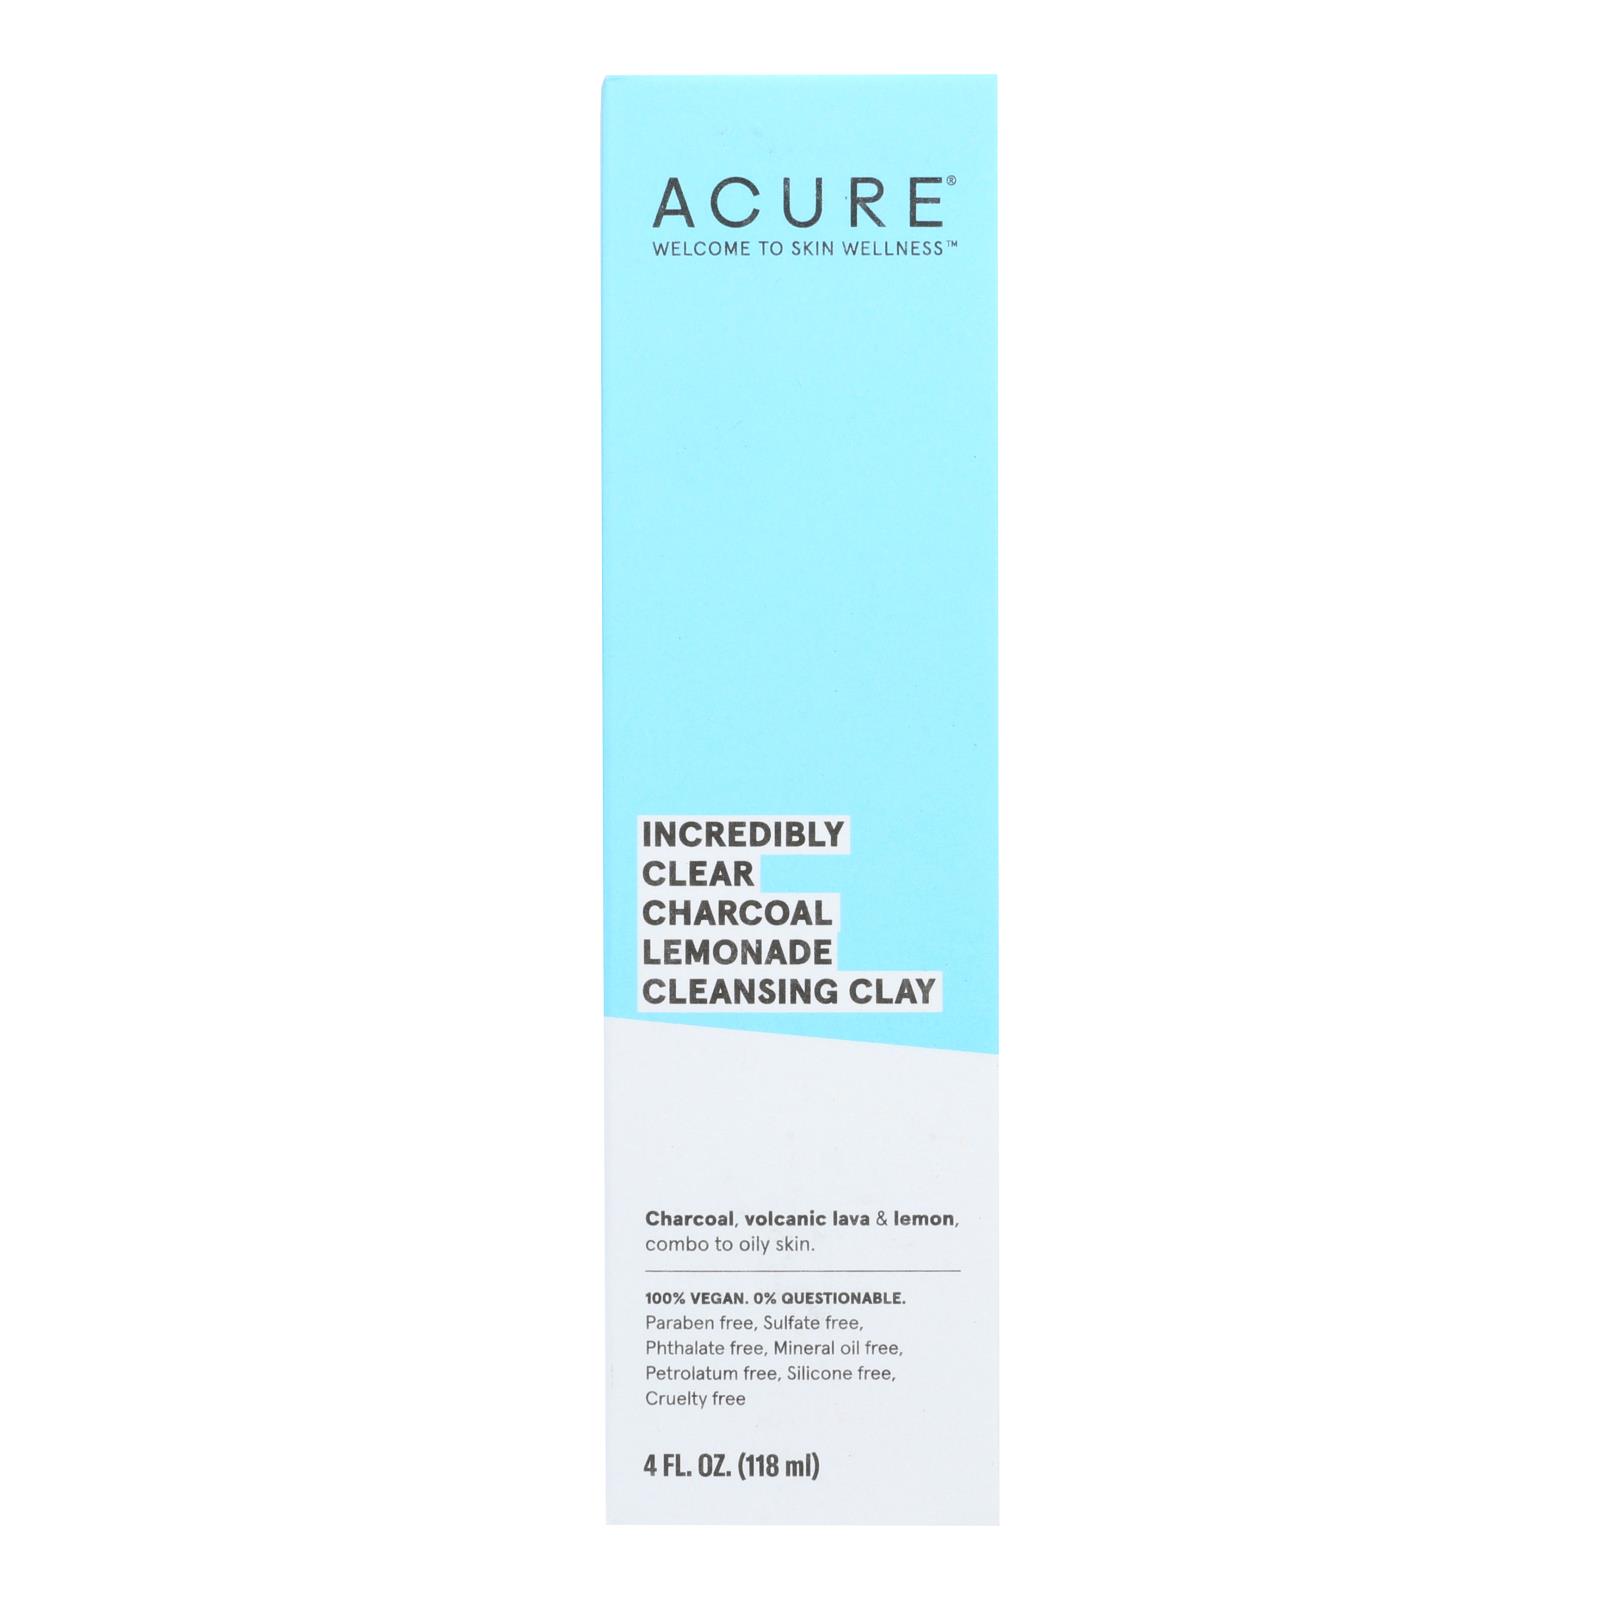 Acure - Charcoal Lemonade Cleansing Clay - Incredibly Clear - 4 fl oz.